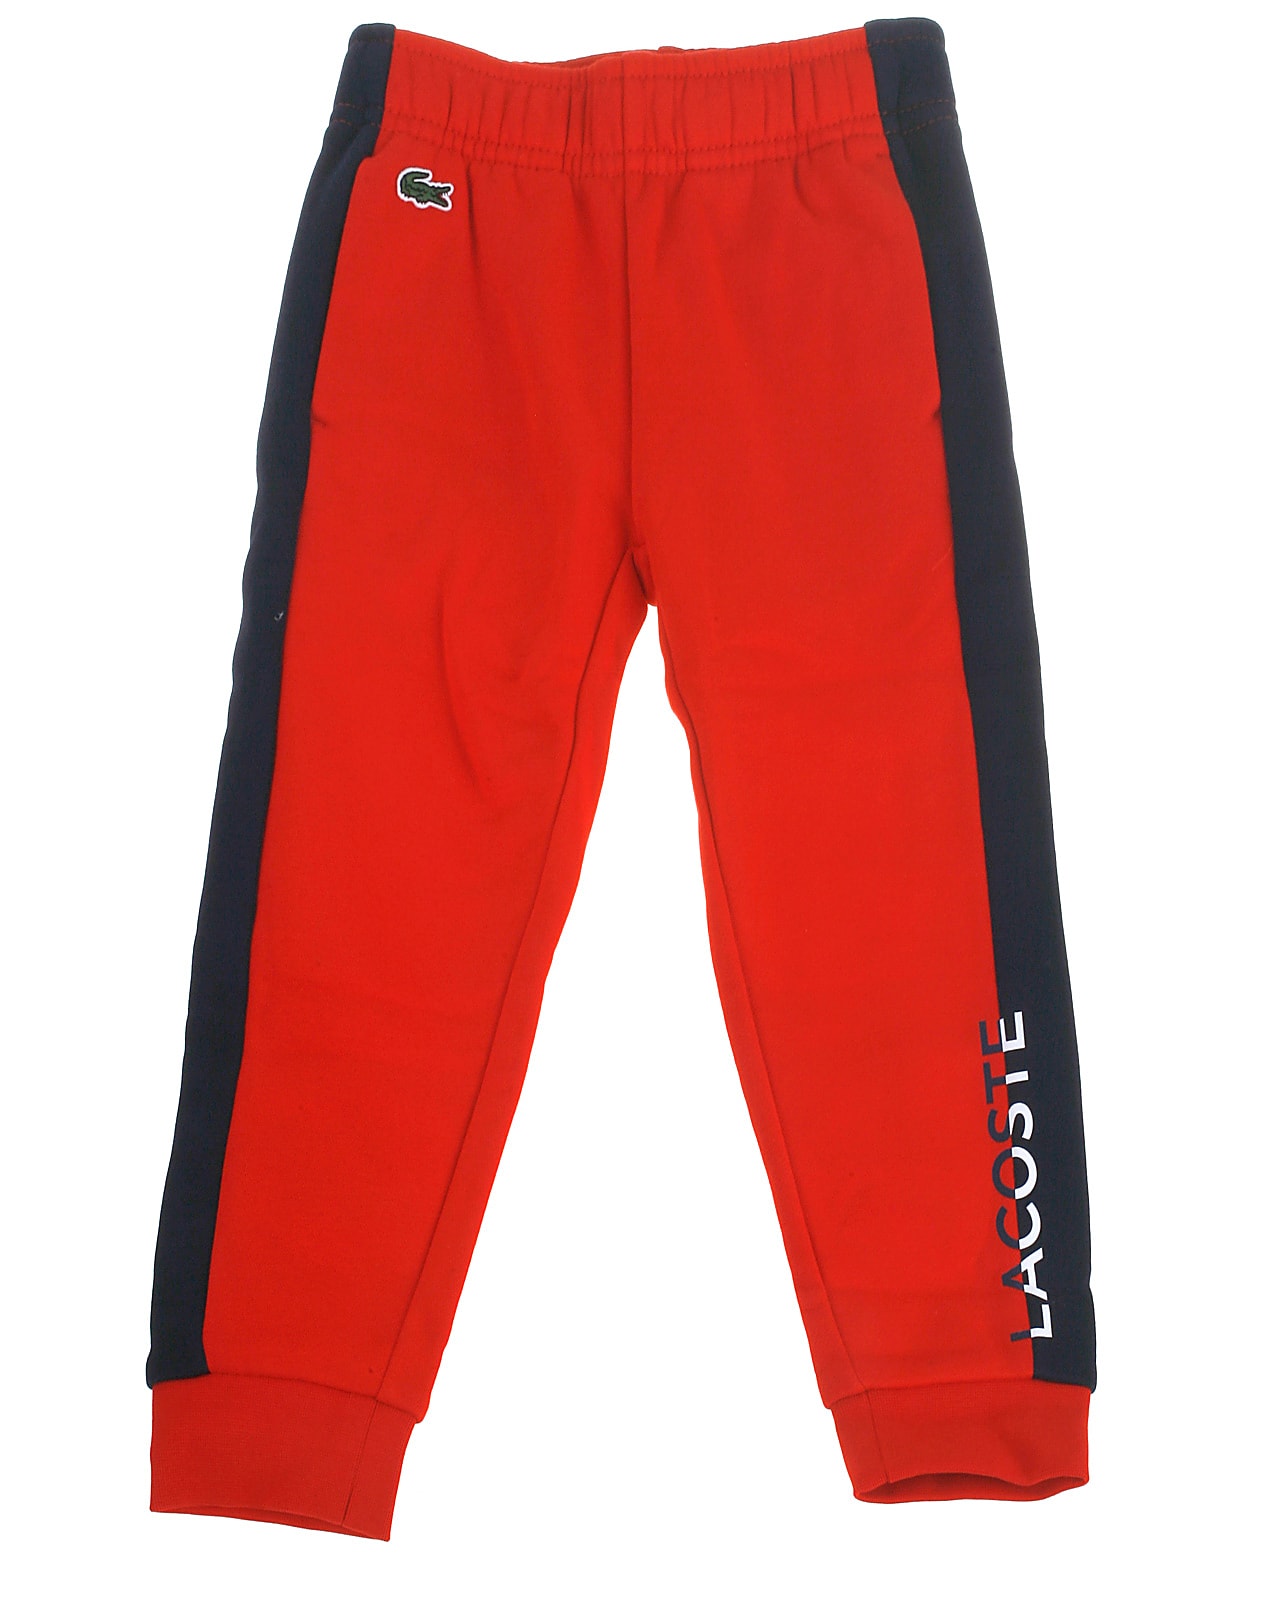 Image of Lacoste sweatpants, red